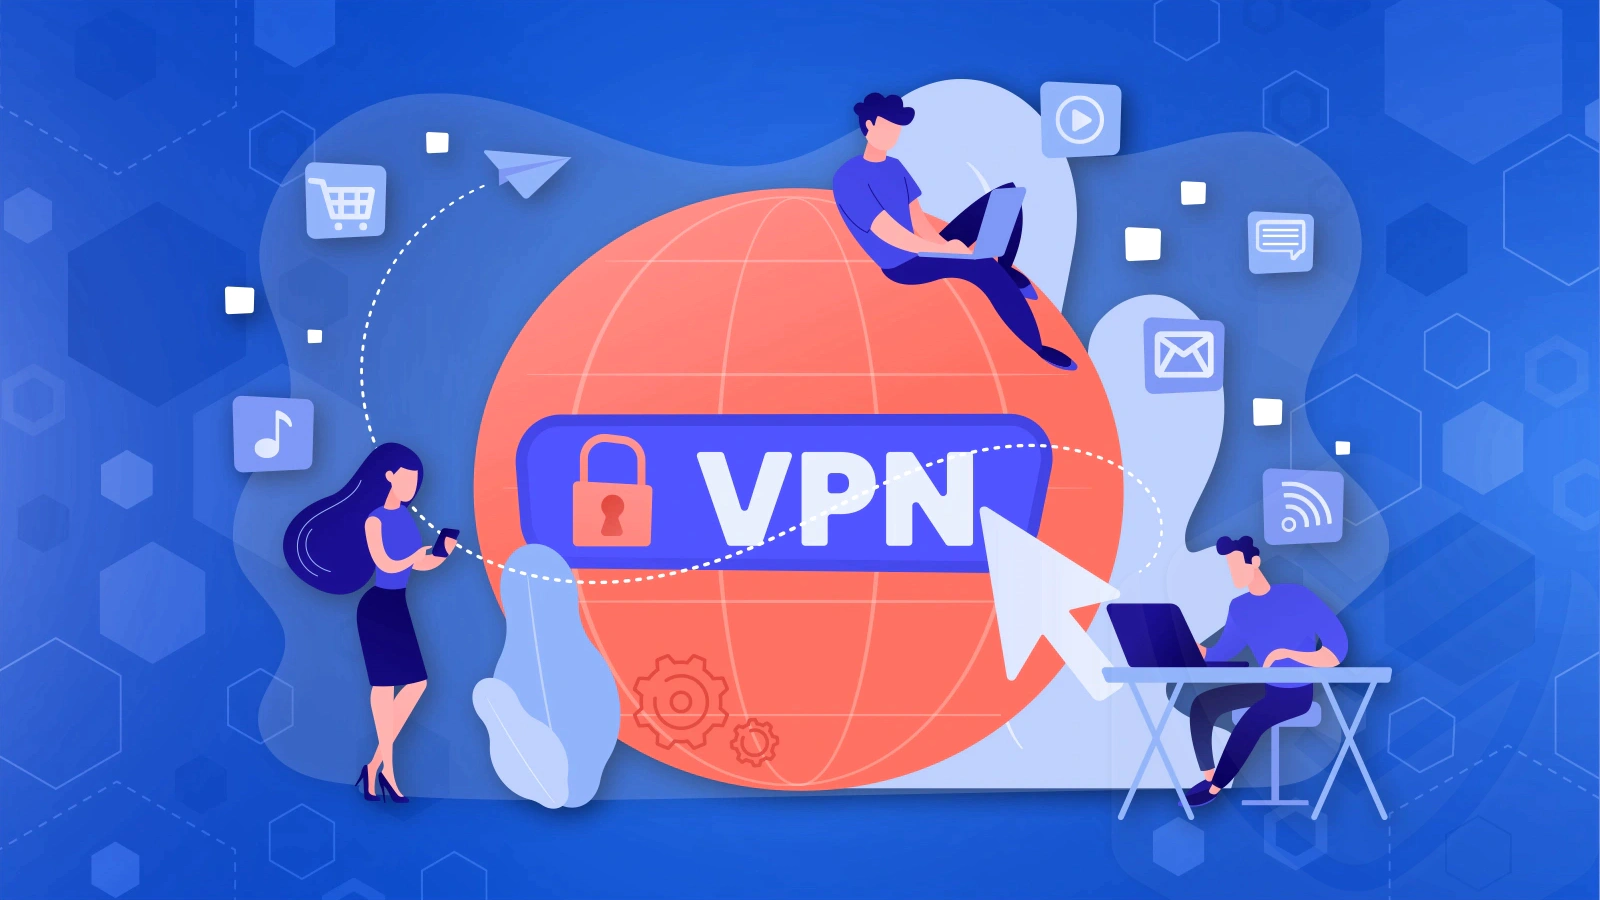 Use a VPN while working from home